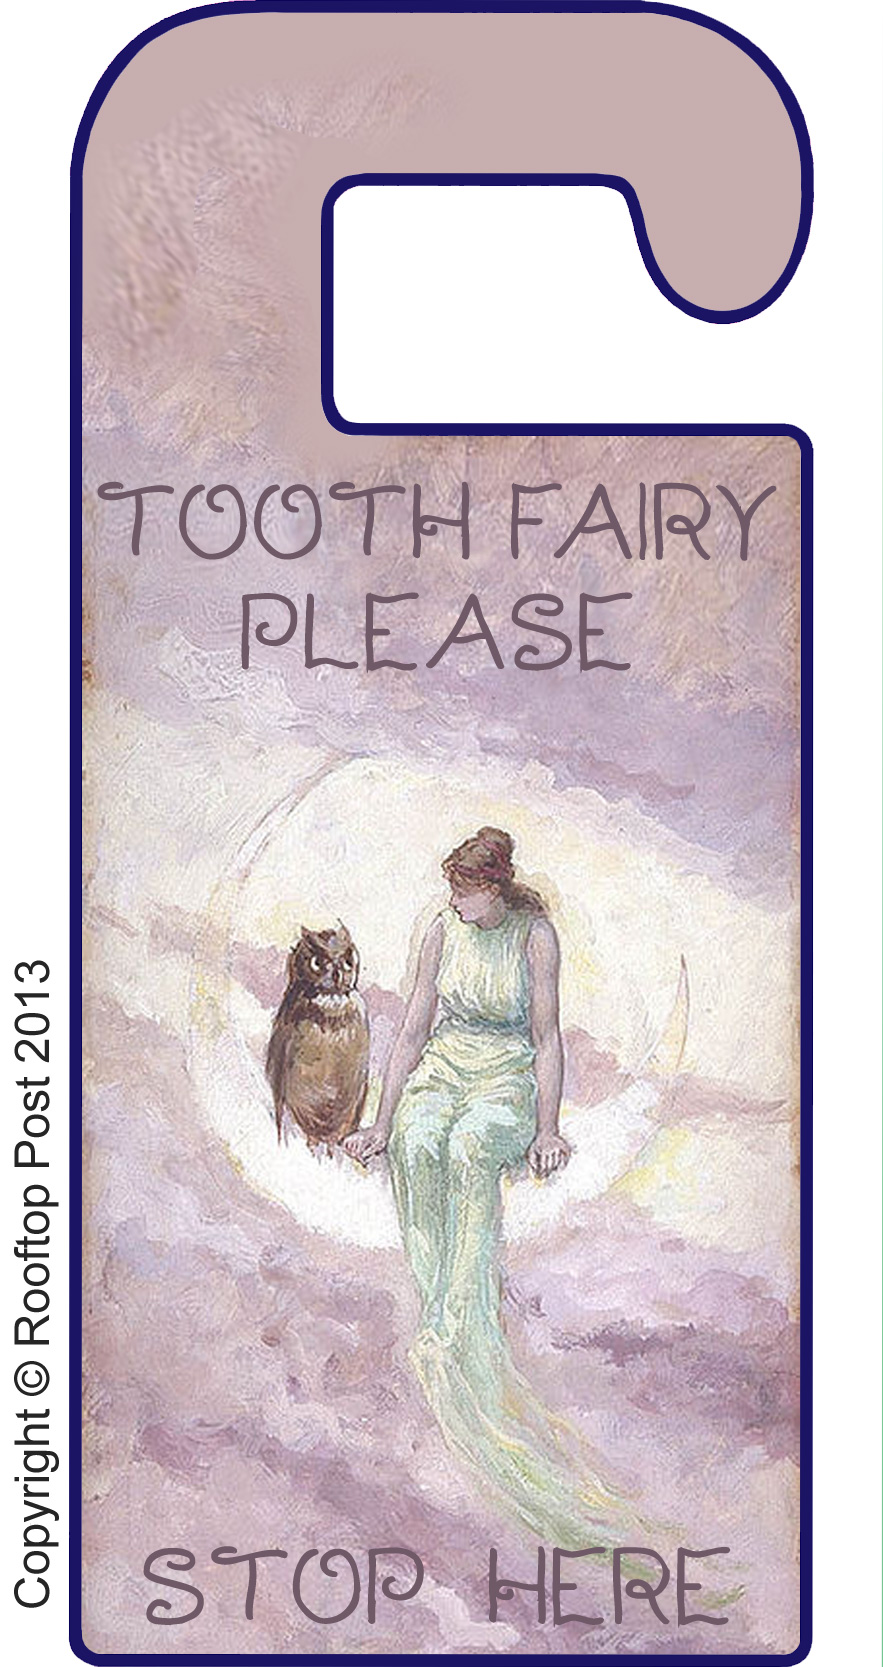 Printable door hanger asking the Tooth Fairy to stop here